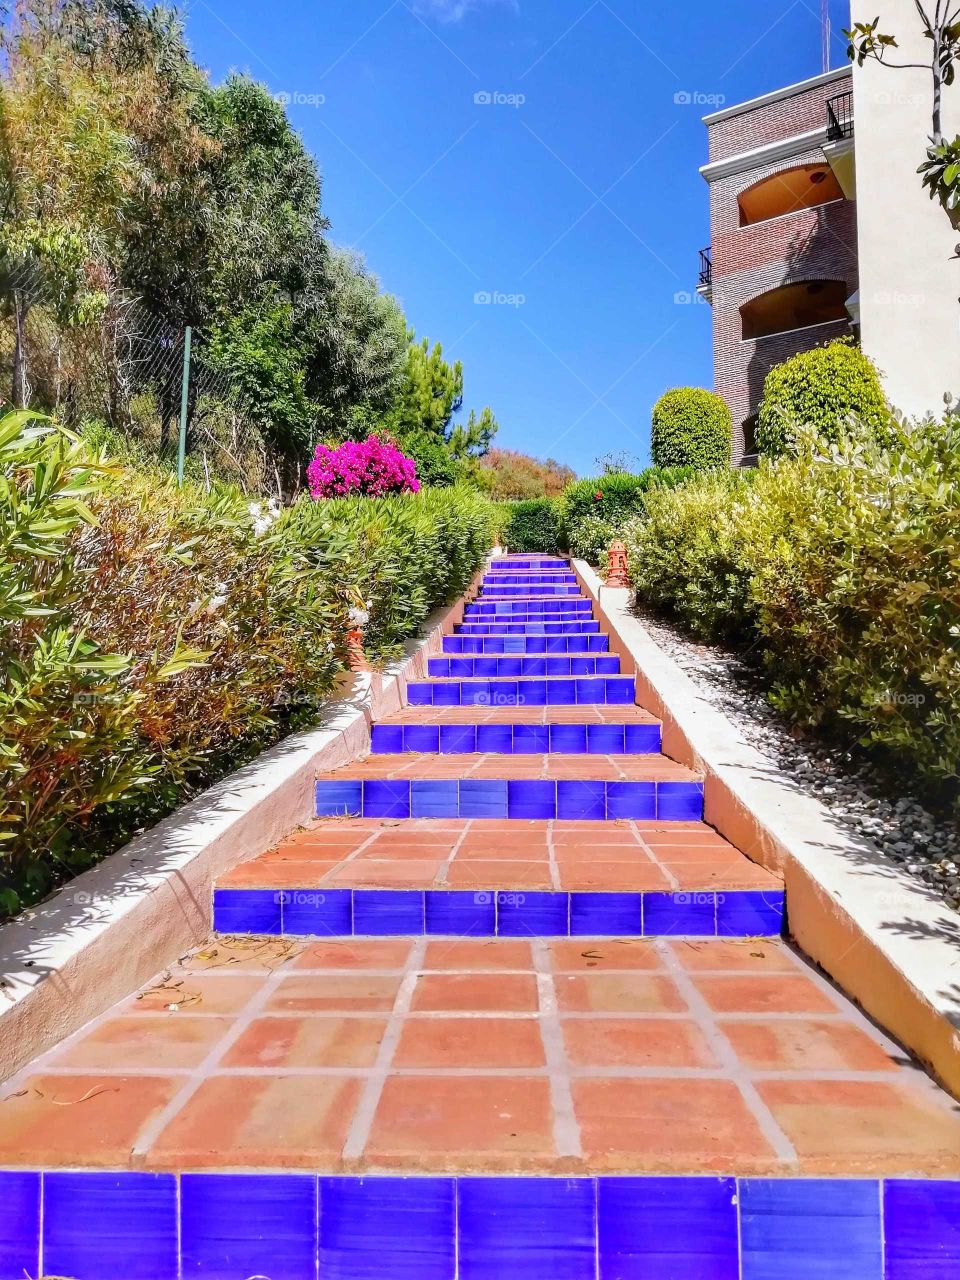 beautiful tiled steps in Spain. design, step, background, style, pattern, architecture, modern, white, beauty, tile, floor, summer, shape, nature, empty, space, trend, trendy, template, studio, scene, view, relaxation, scrub, facial, moroccan tiles,